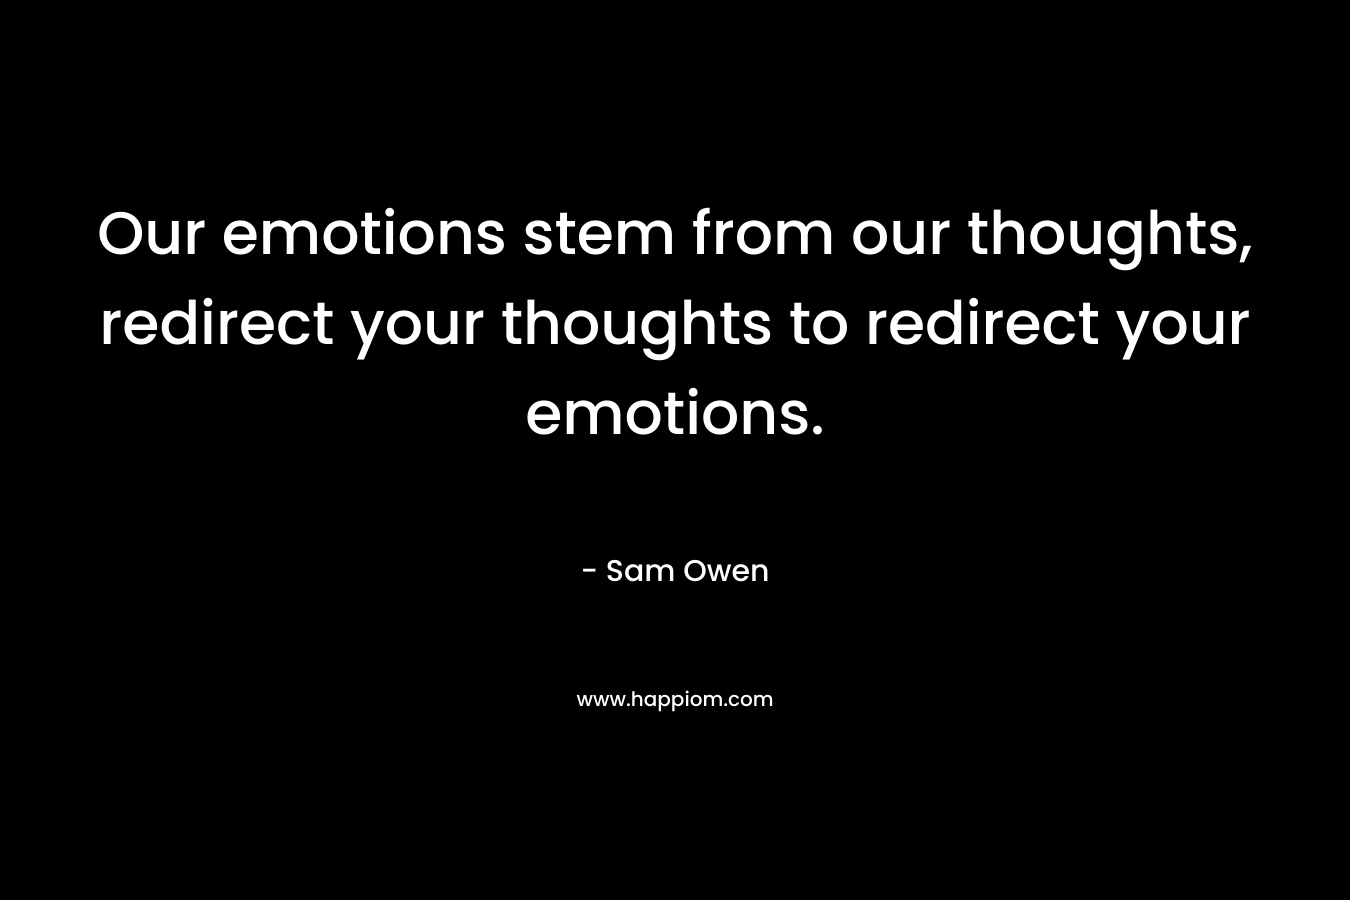 Our emotions stem from our thoughts, redirect your thoughts to redirect your emotions. – Sam Owen